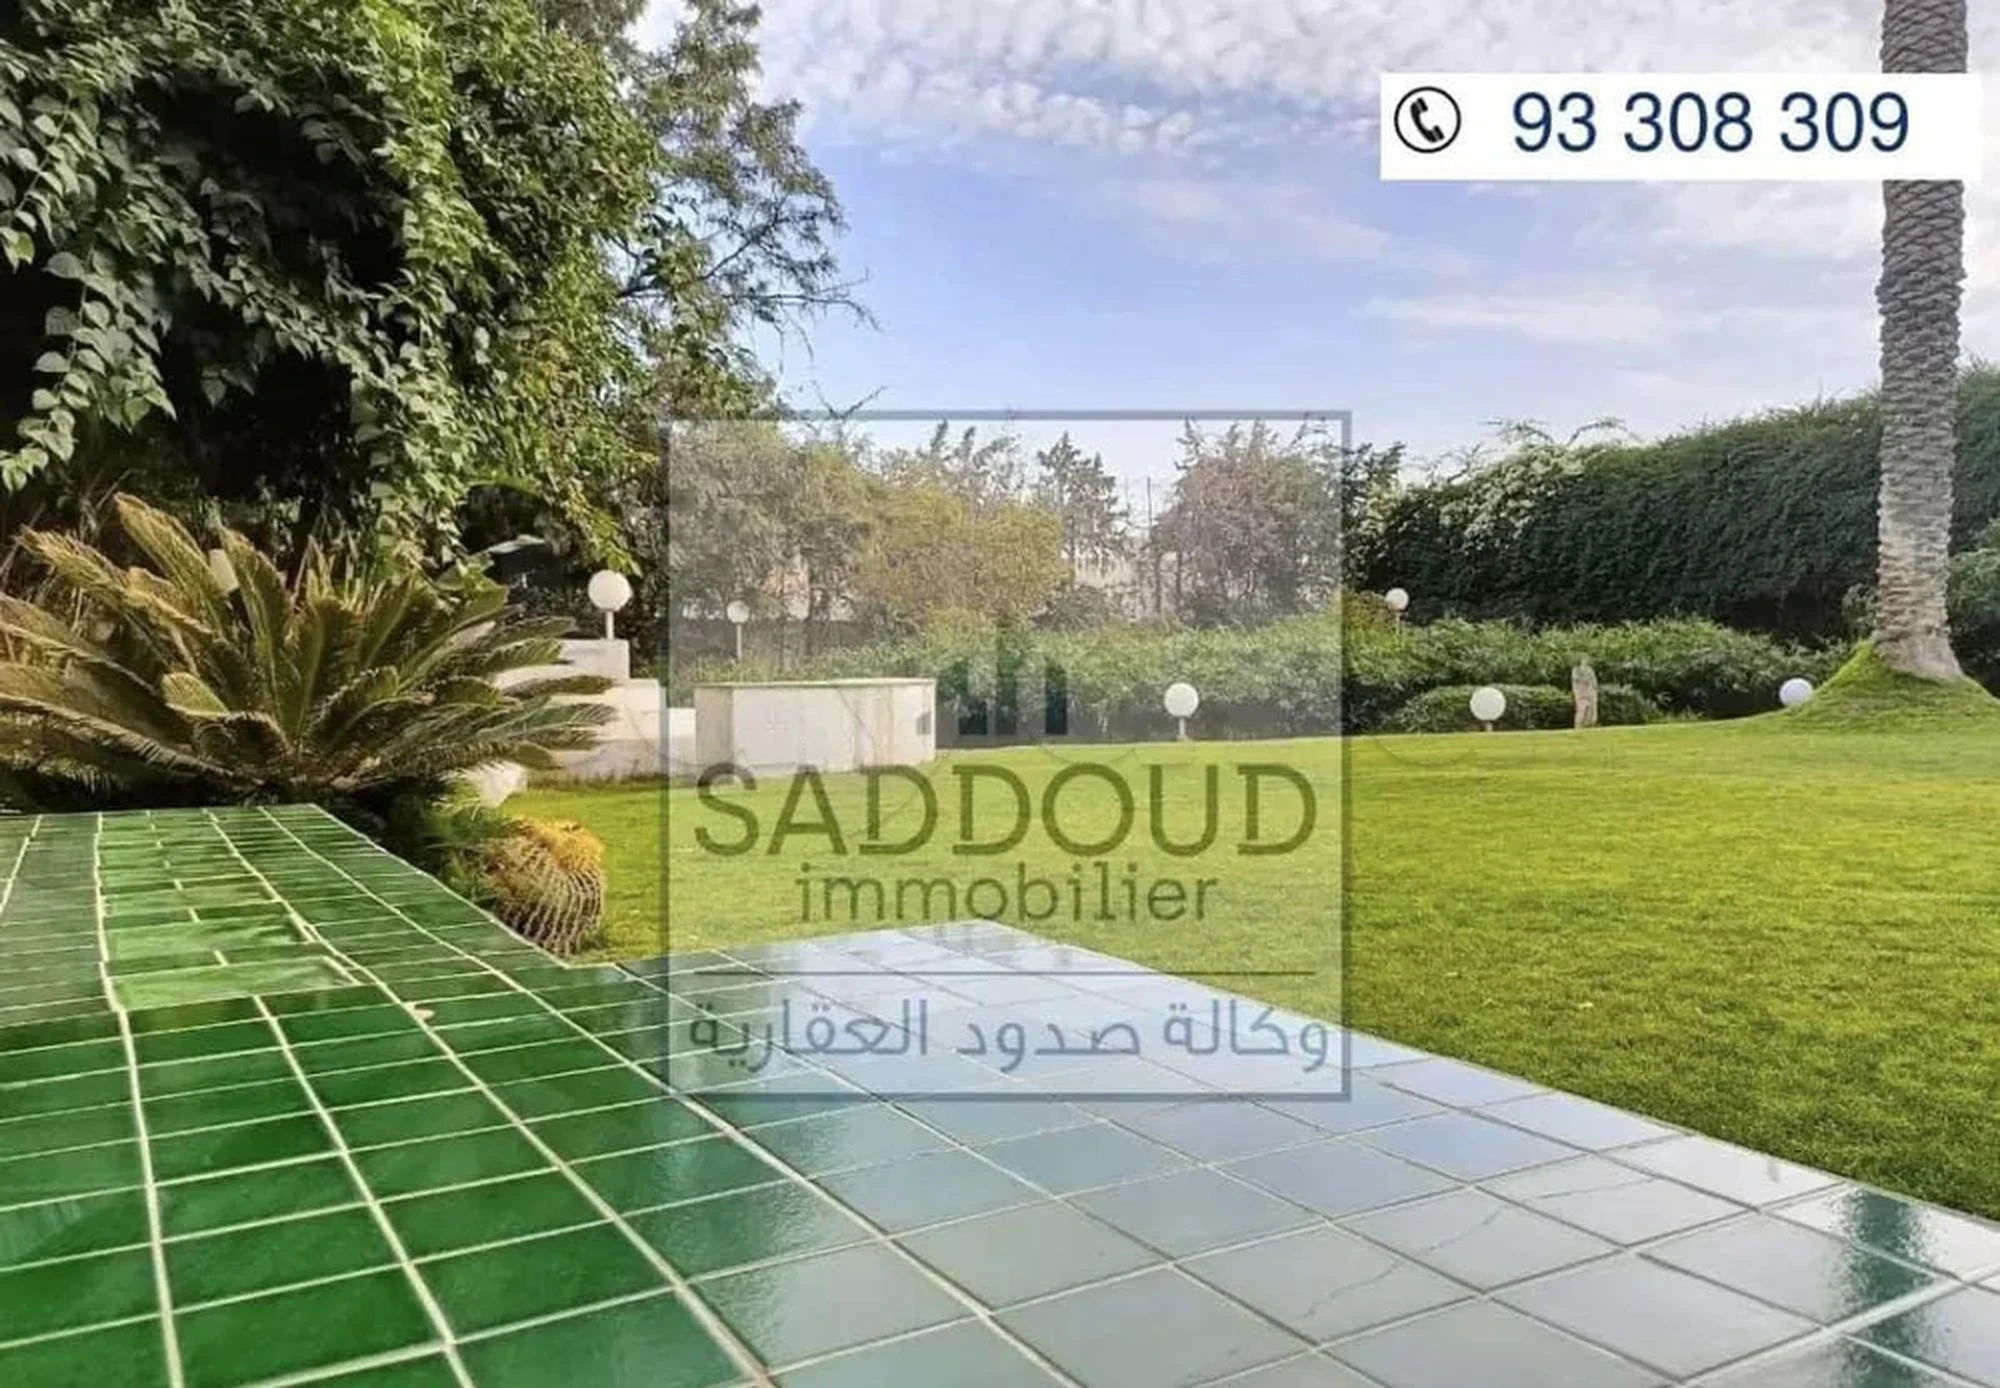 tayara shop cover of Saddoud Immobilier 